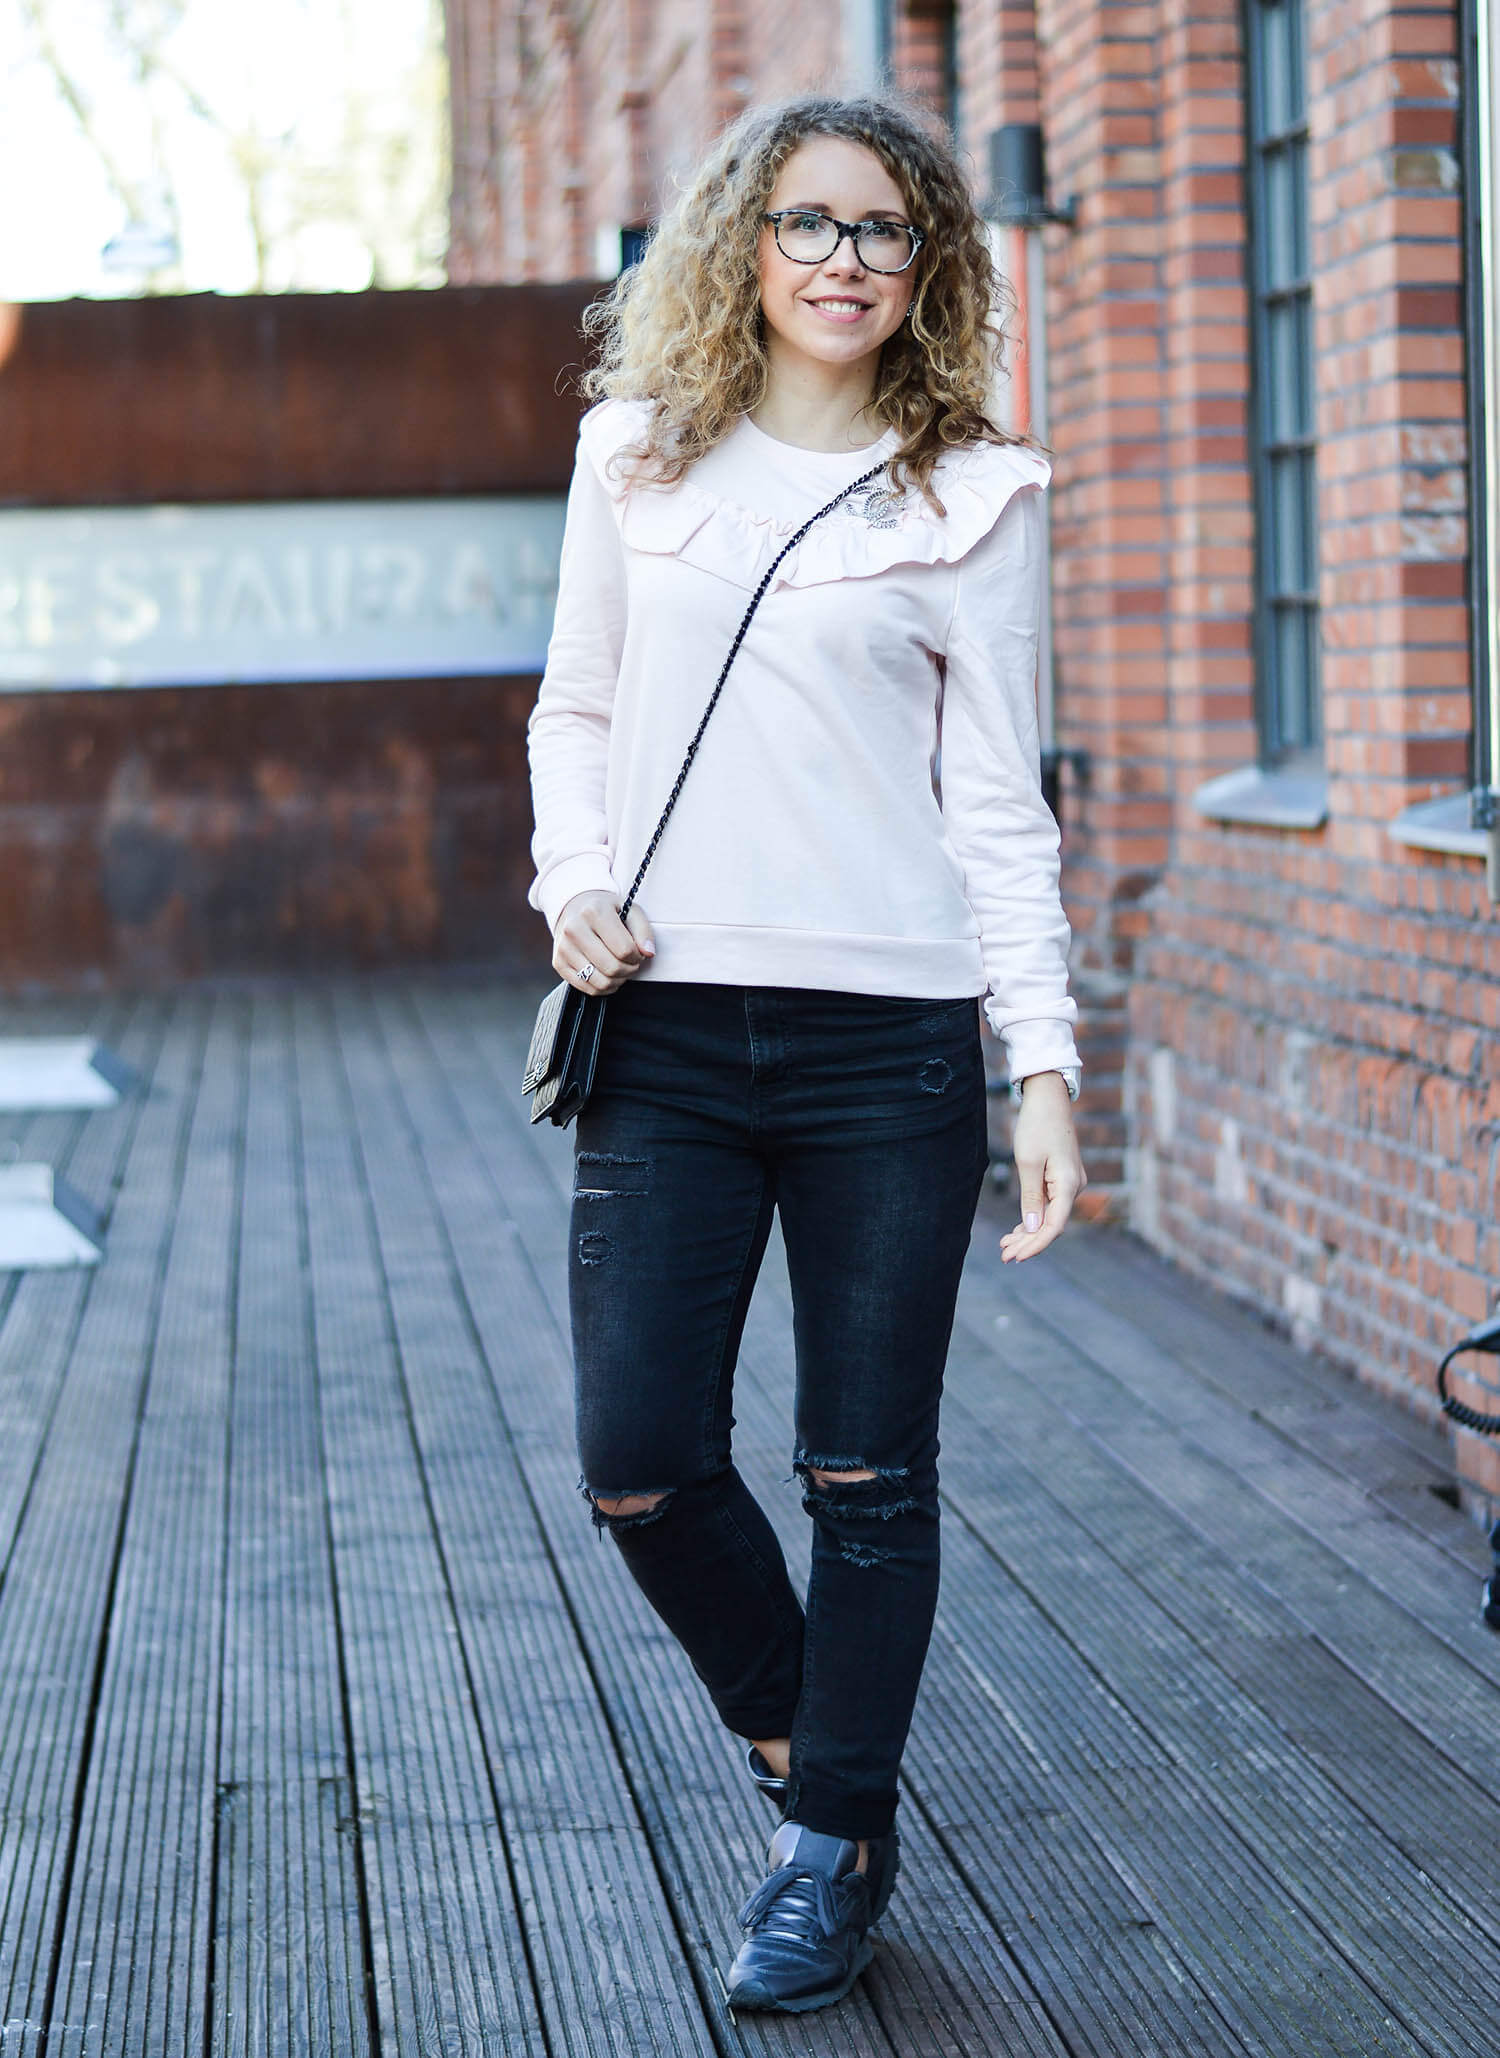 Kationette-fashionblog-nrw-Outfit-Volant-Sweater-Ripped-Jeans-Chanel-Boy-WOC-berlin